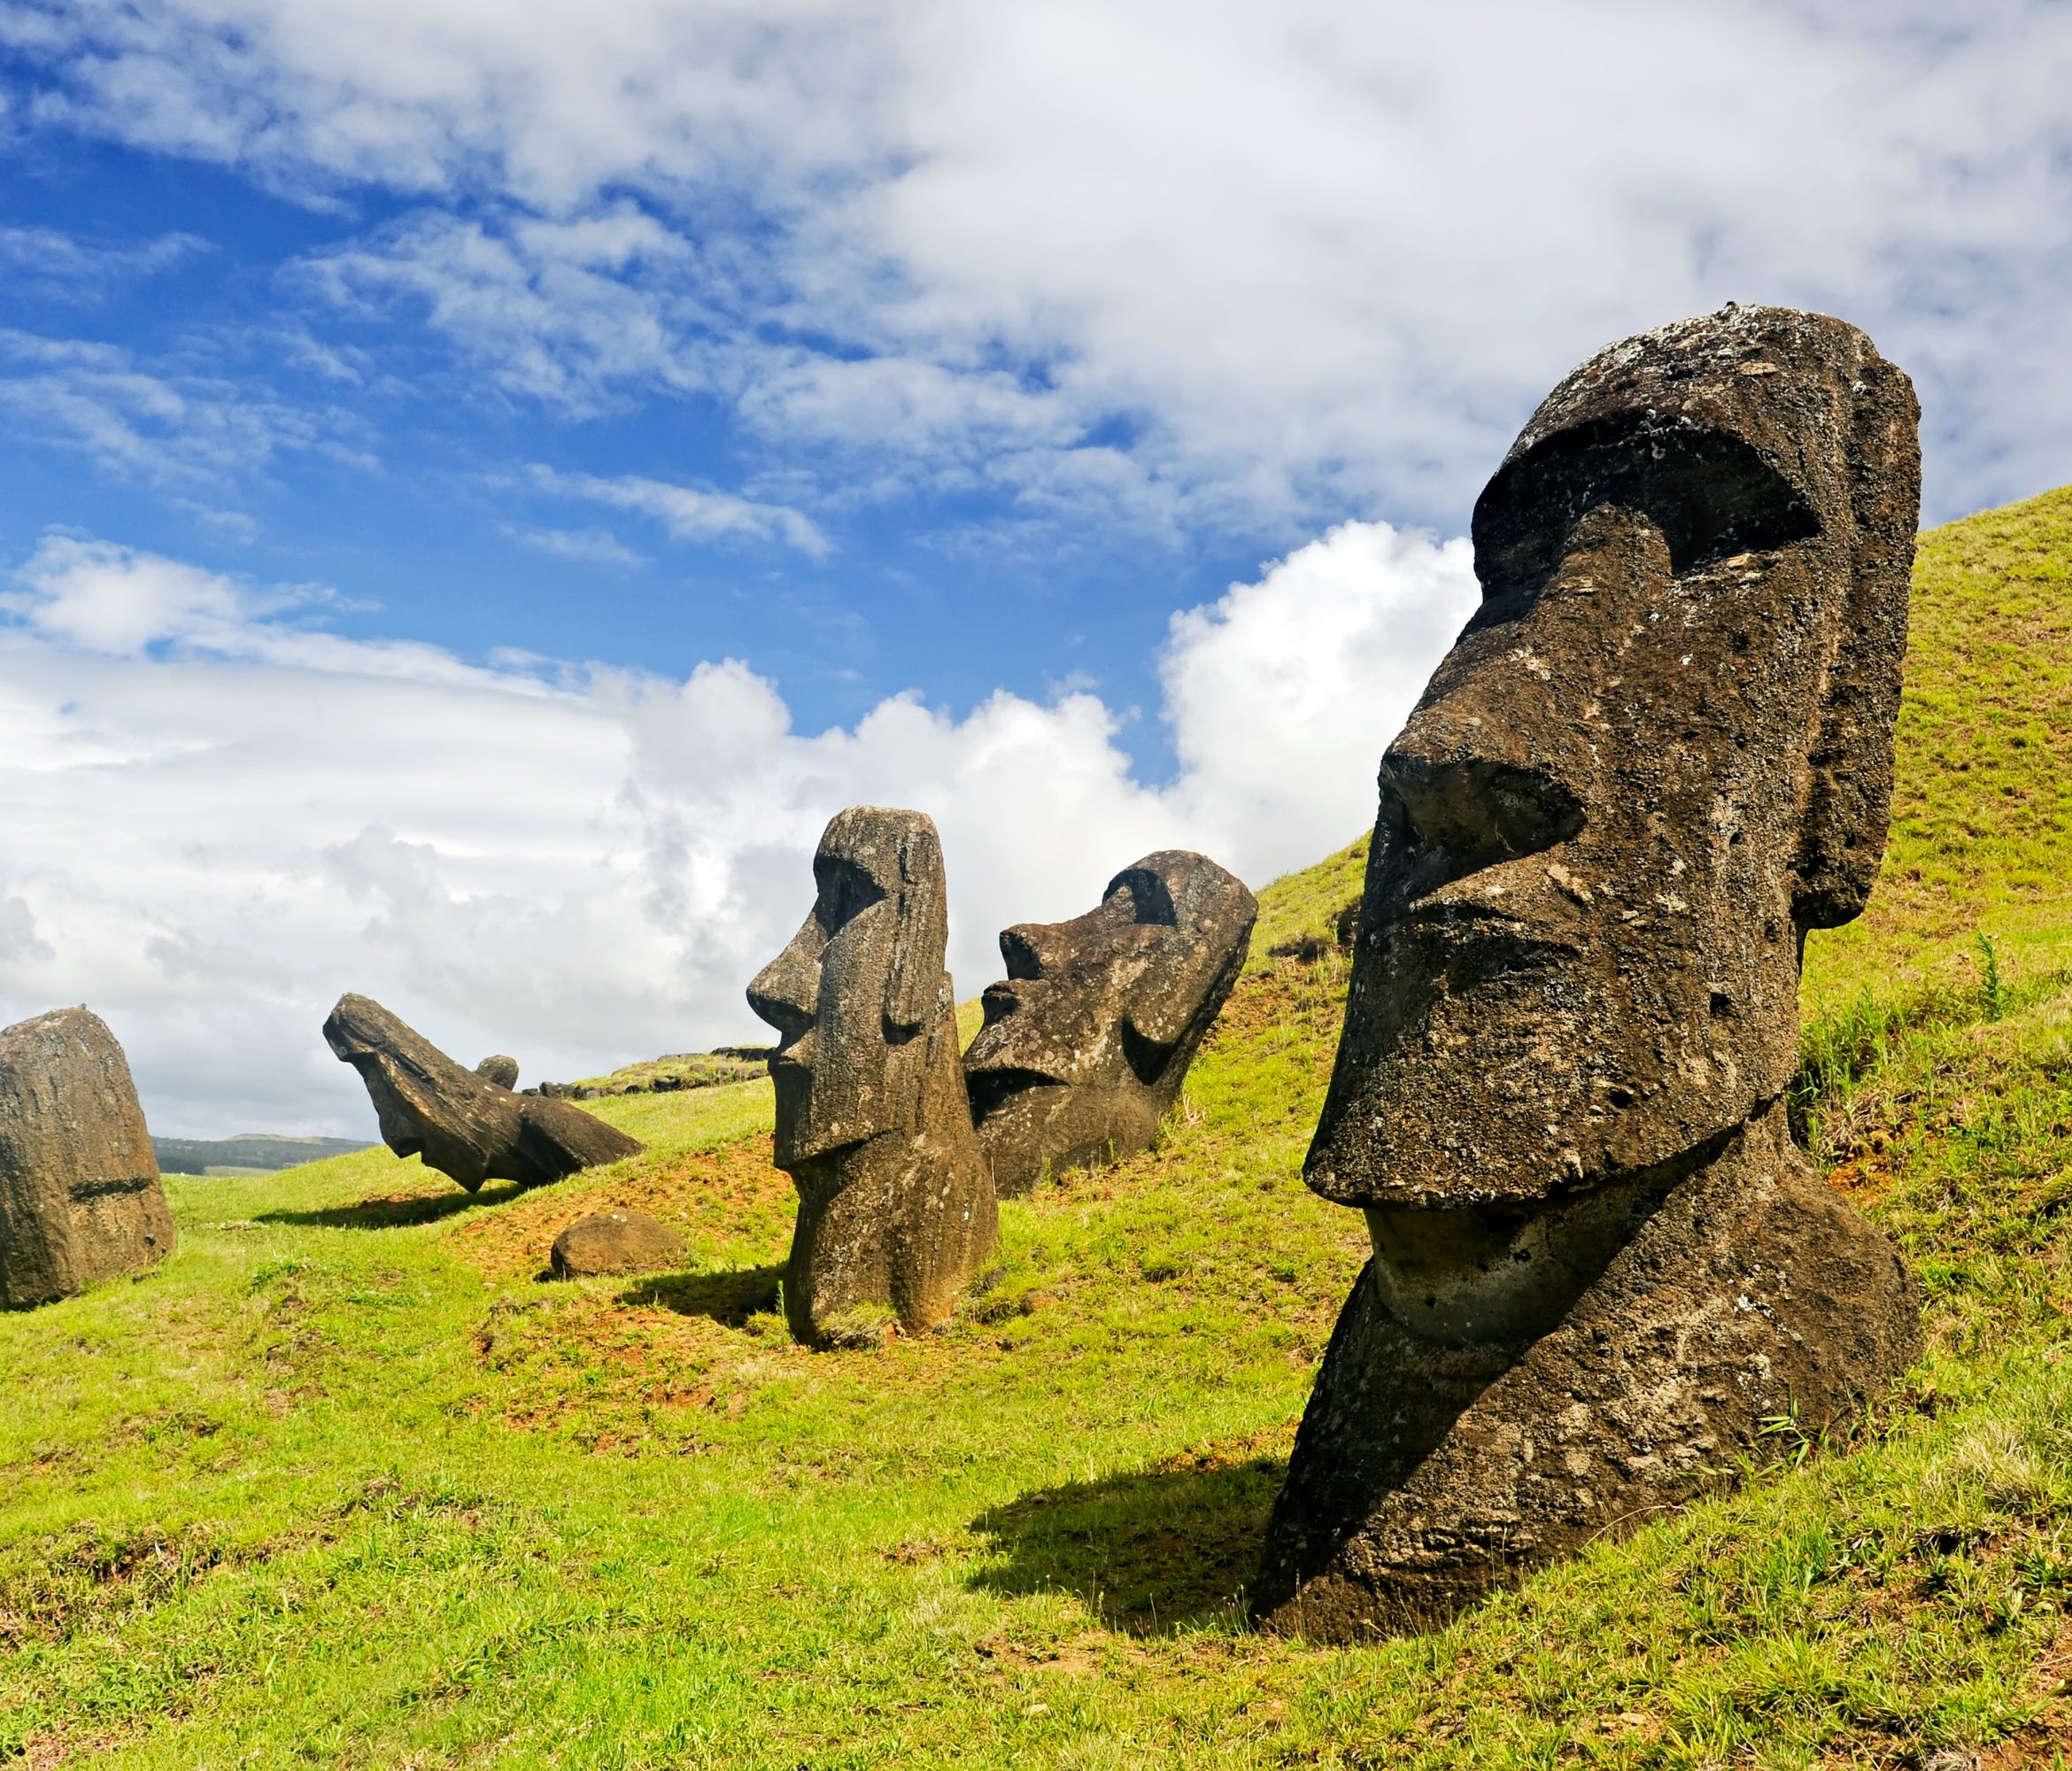 Uncover the mysteries of Easter Island at Explora Rapa Nui: Just 63 square miles in size, Easter Island (called Rapa Nui by its indigenous people) packs a lot of adventure into its small stature: Think volcanos, beaches, wild horses, and of course mo